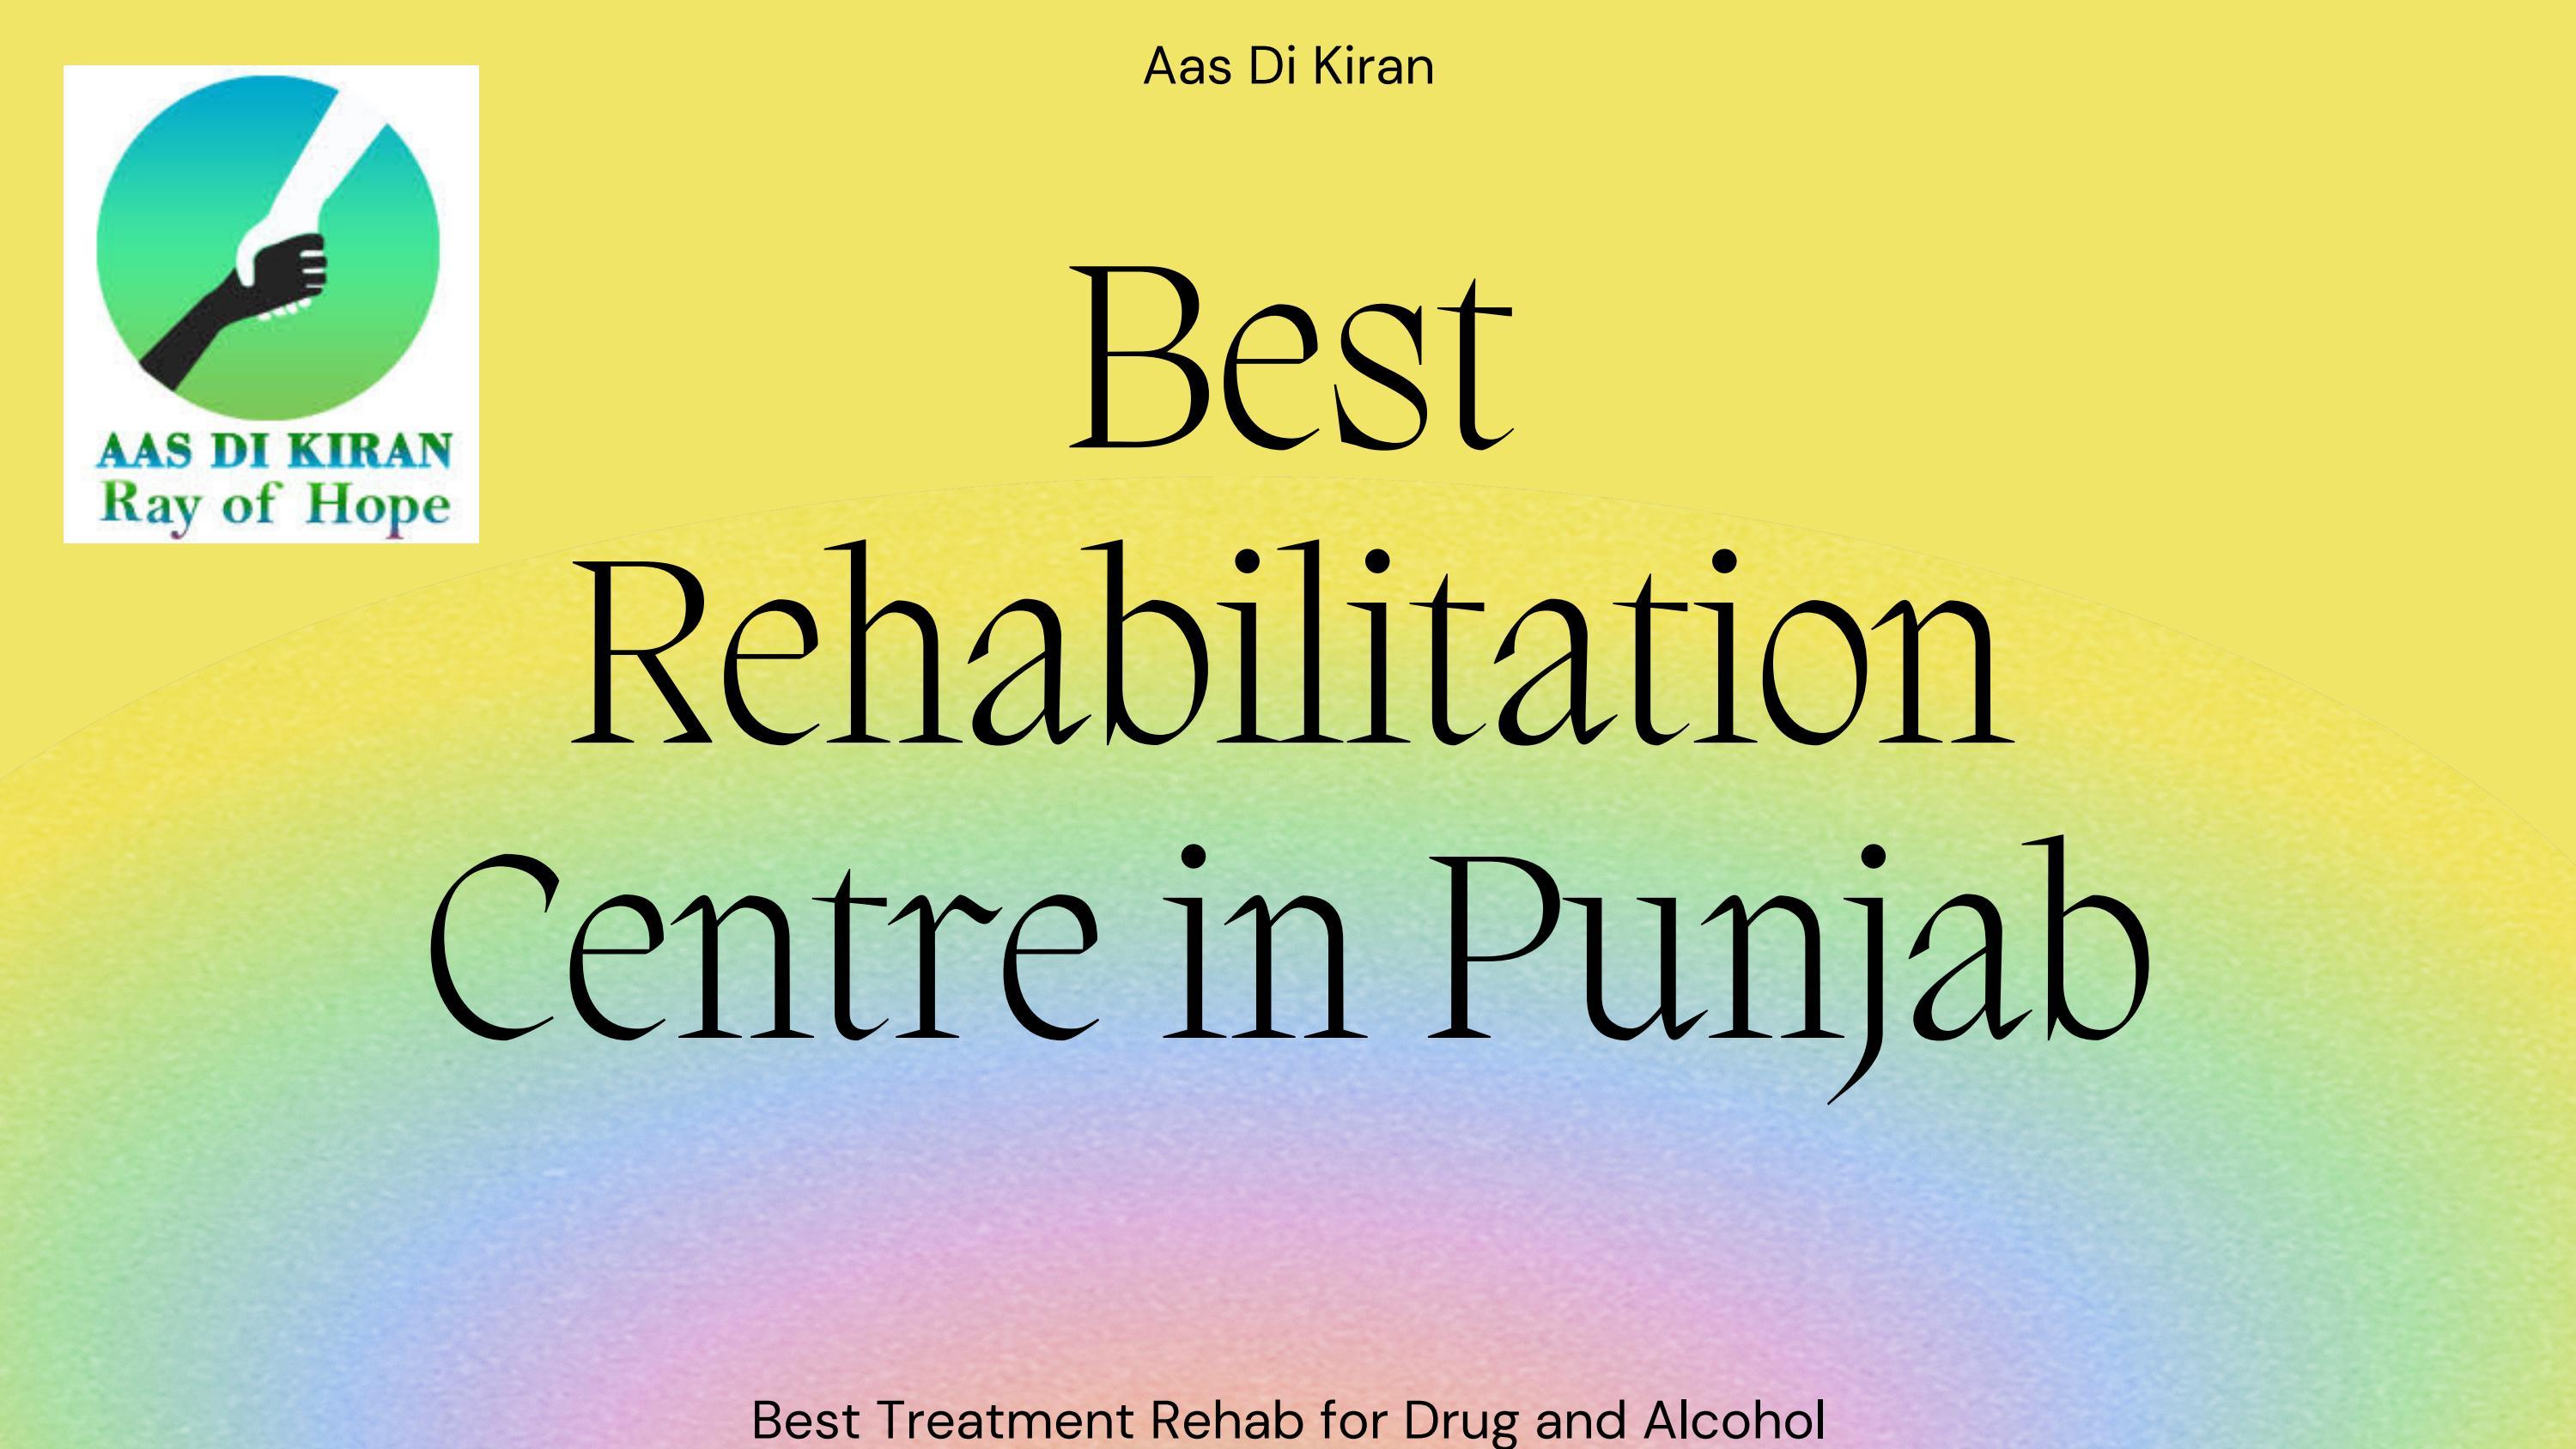 Best Rehabilitation Centre in Punjab for Drug and Alcohol